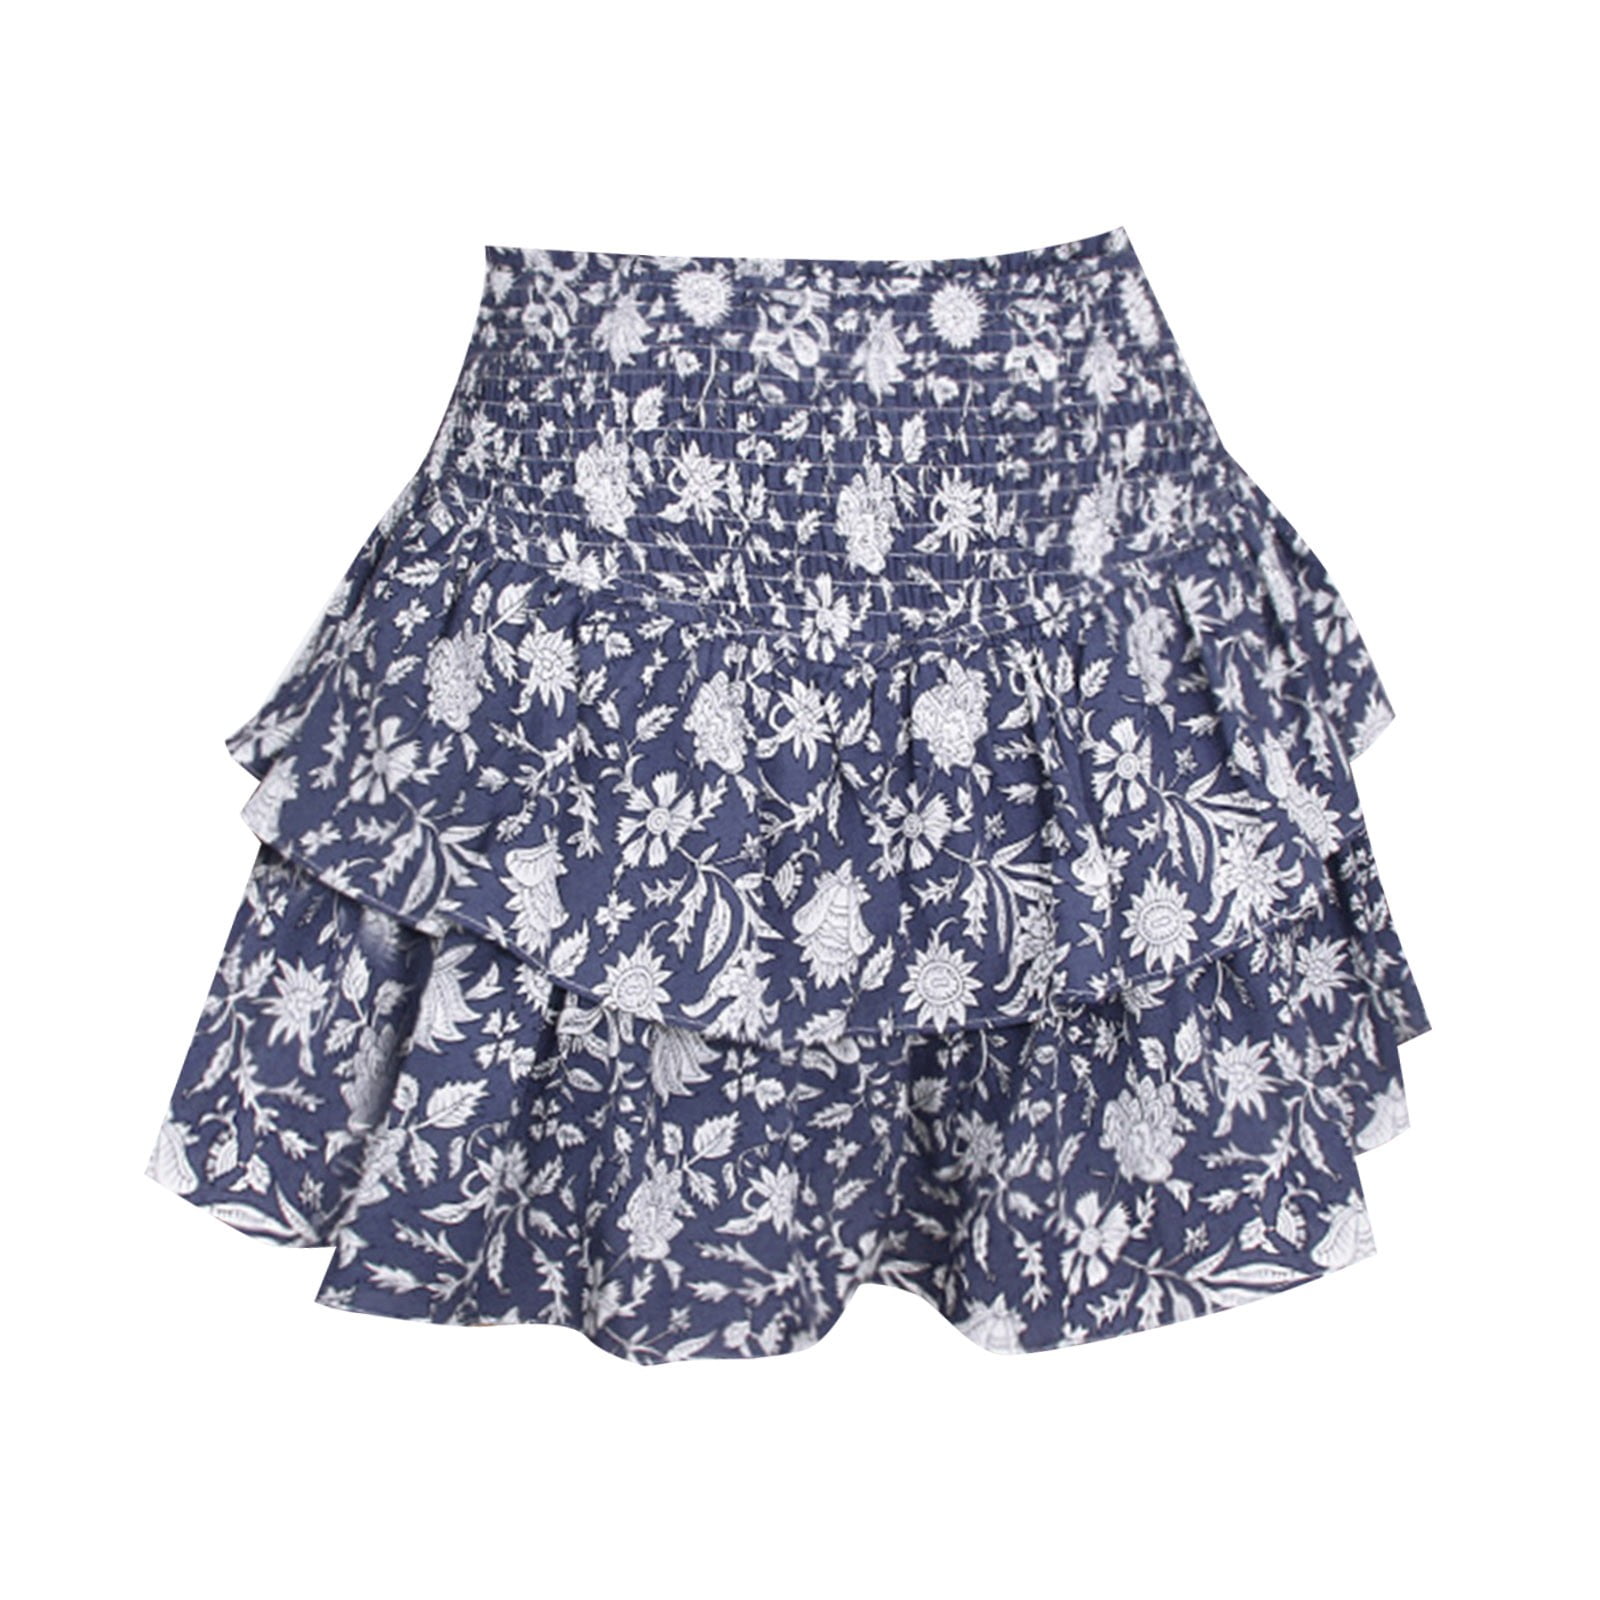 Personalized Fashion Printed Short Skirt Simple And Exquisite Design